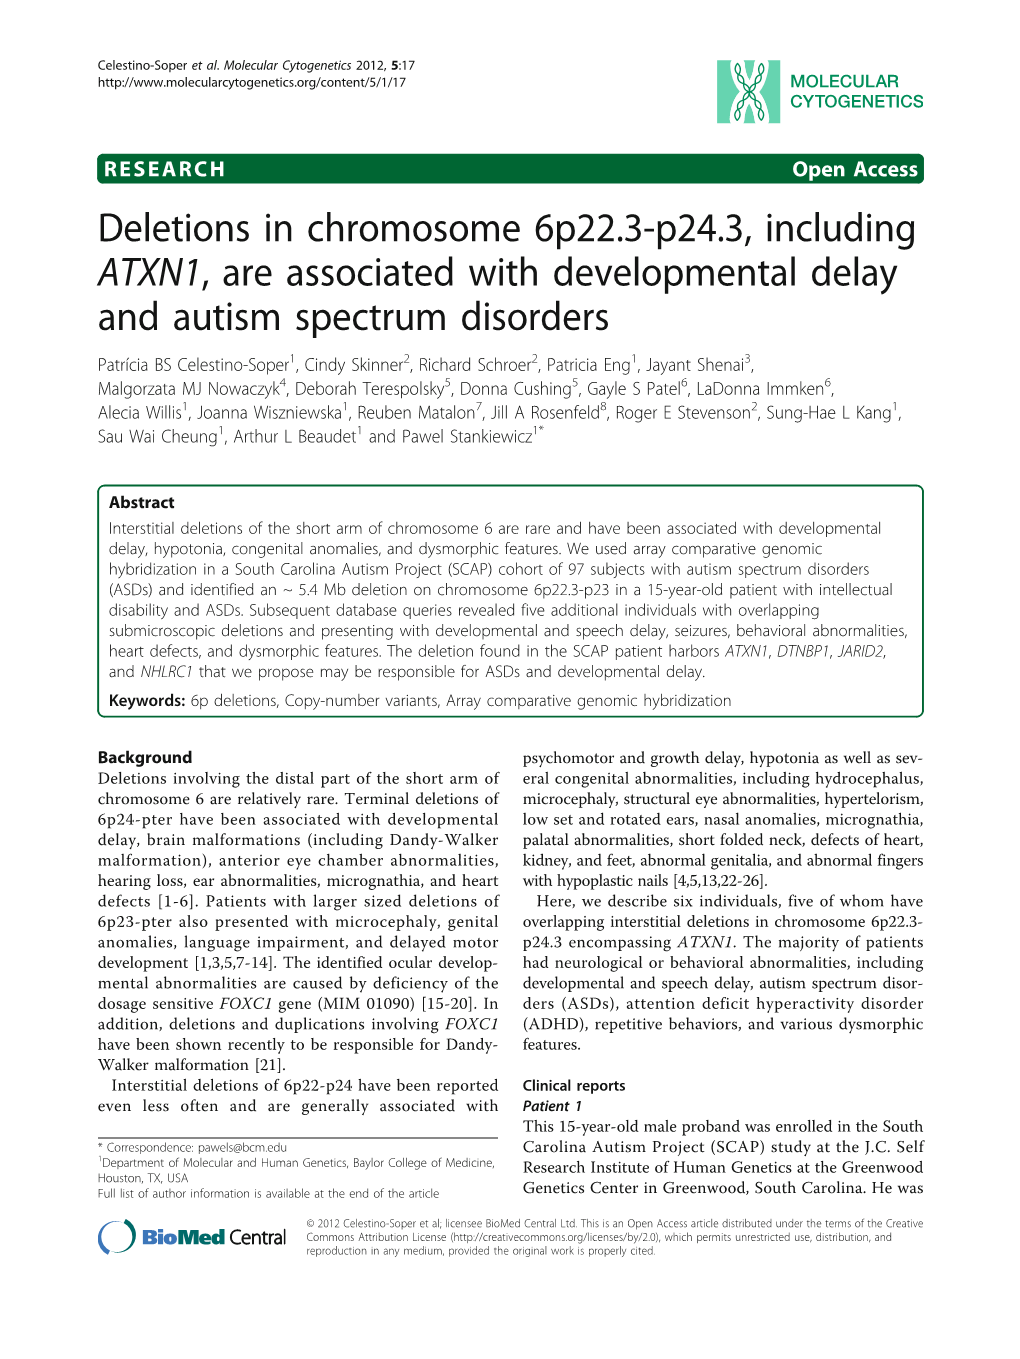 Deletions in Chromosome 6P22.3-P24.3, Including ATXN1, Are Associated with Developmental Delay and Autism Spectrum Disorders